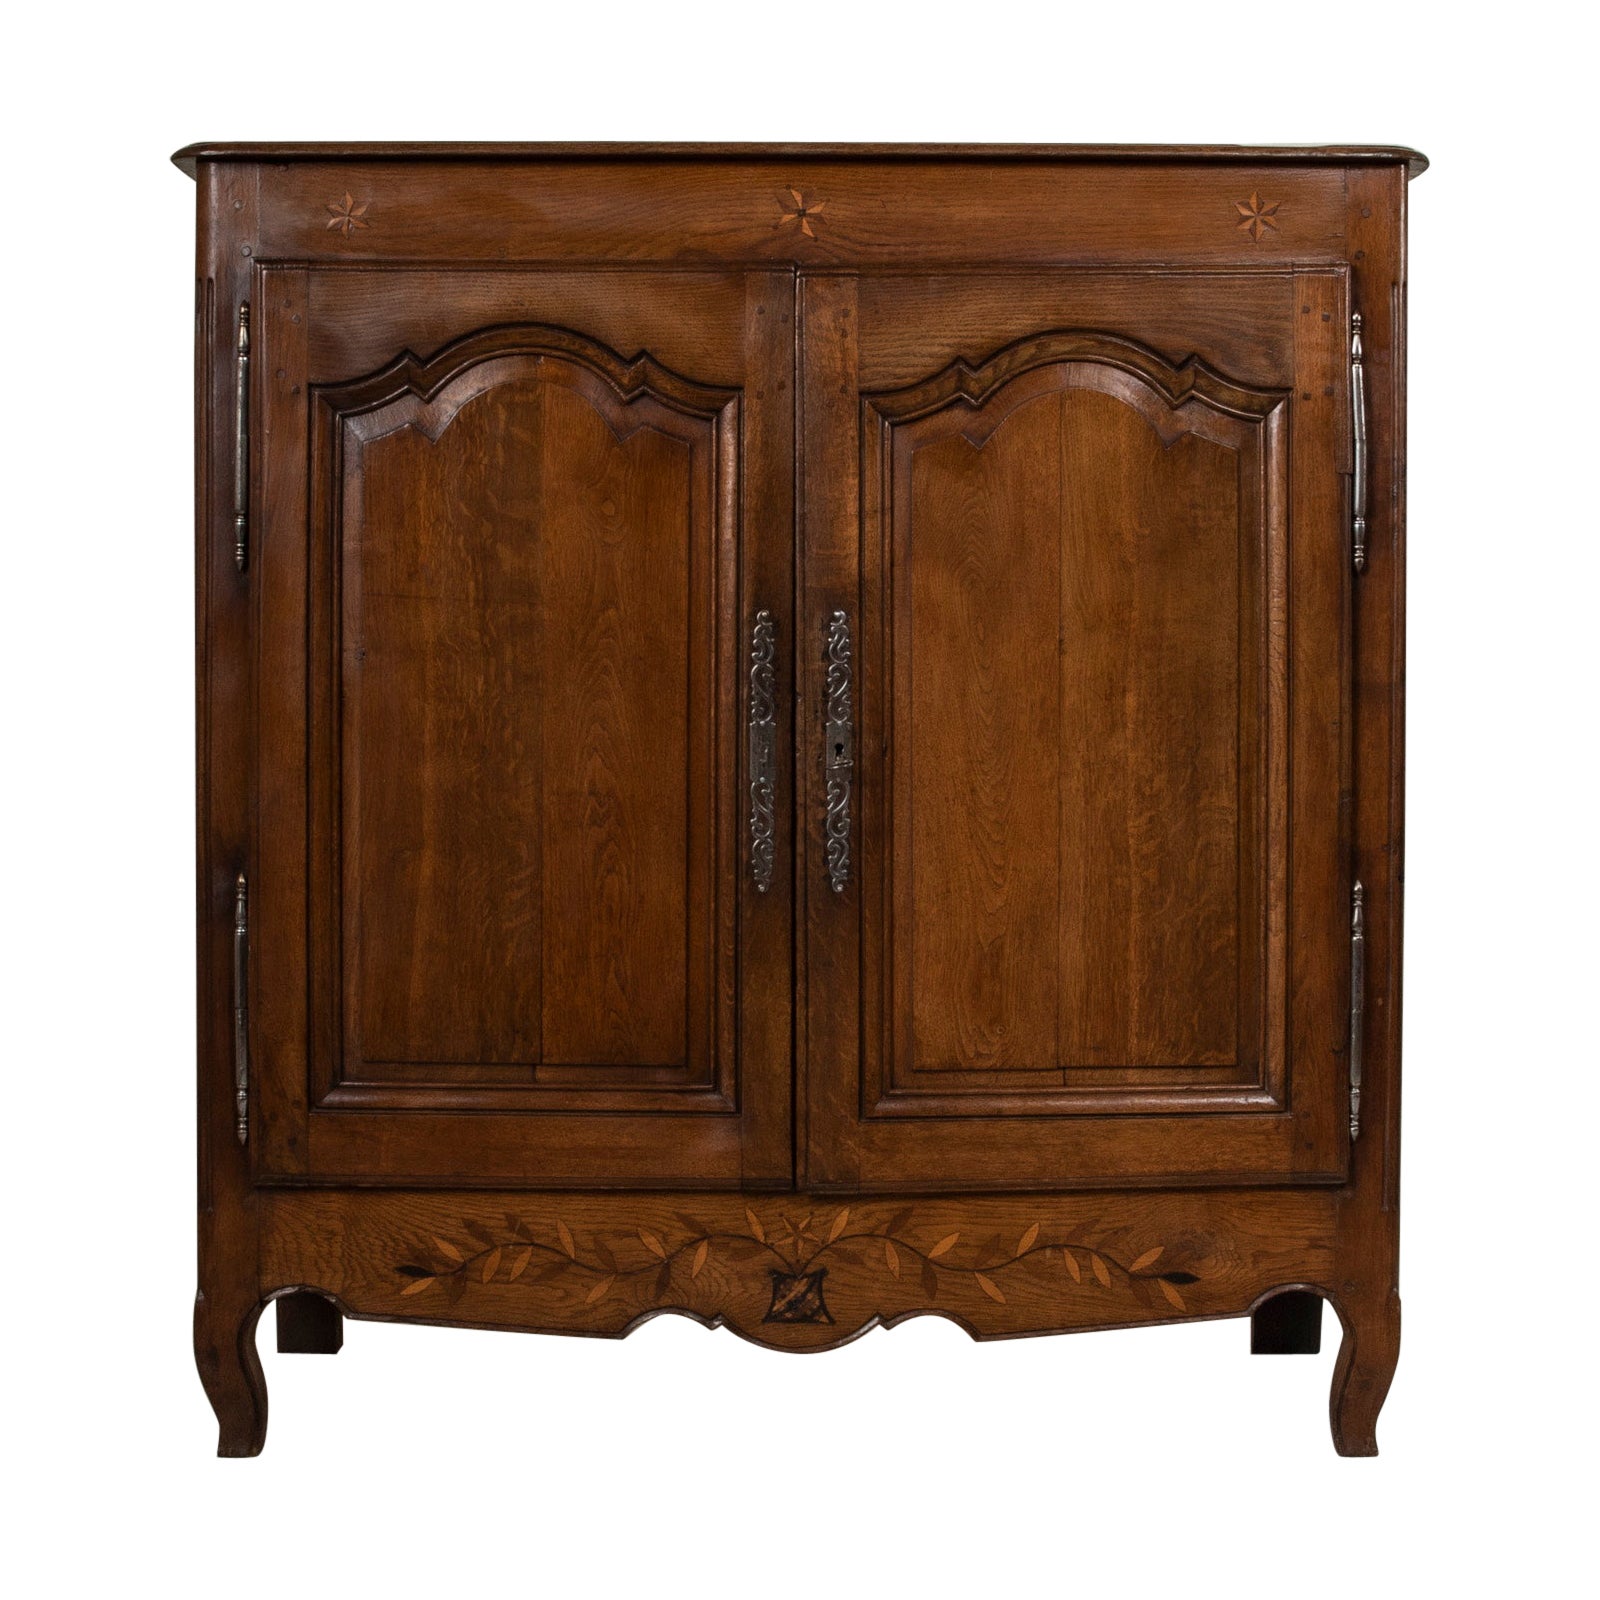 Early 19th Century French Oak Bassette, Small Armoire, Buffet D'appui